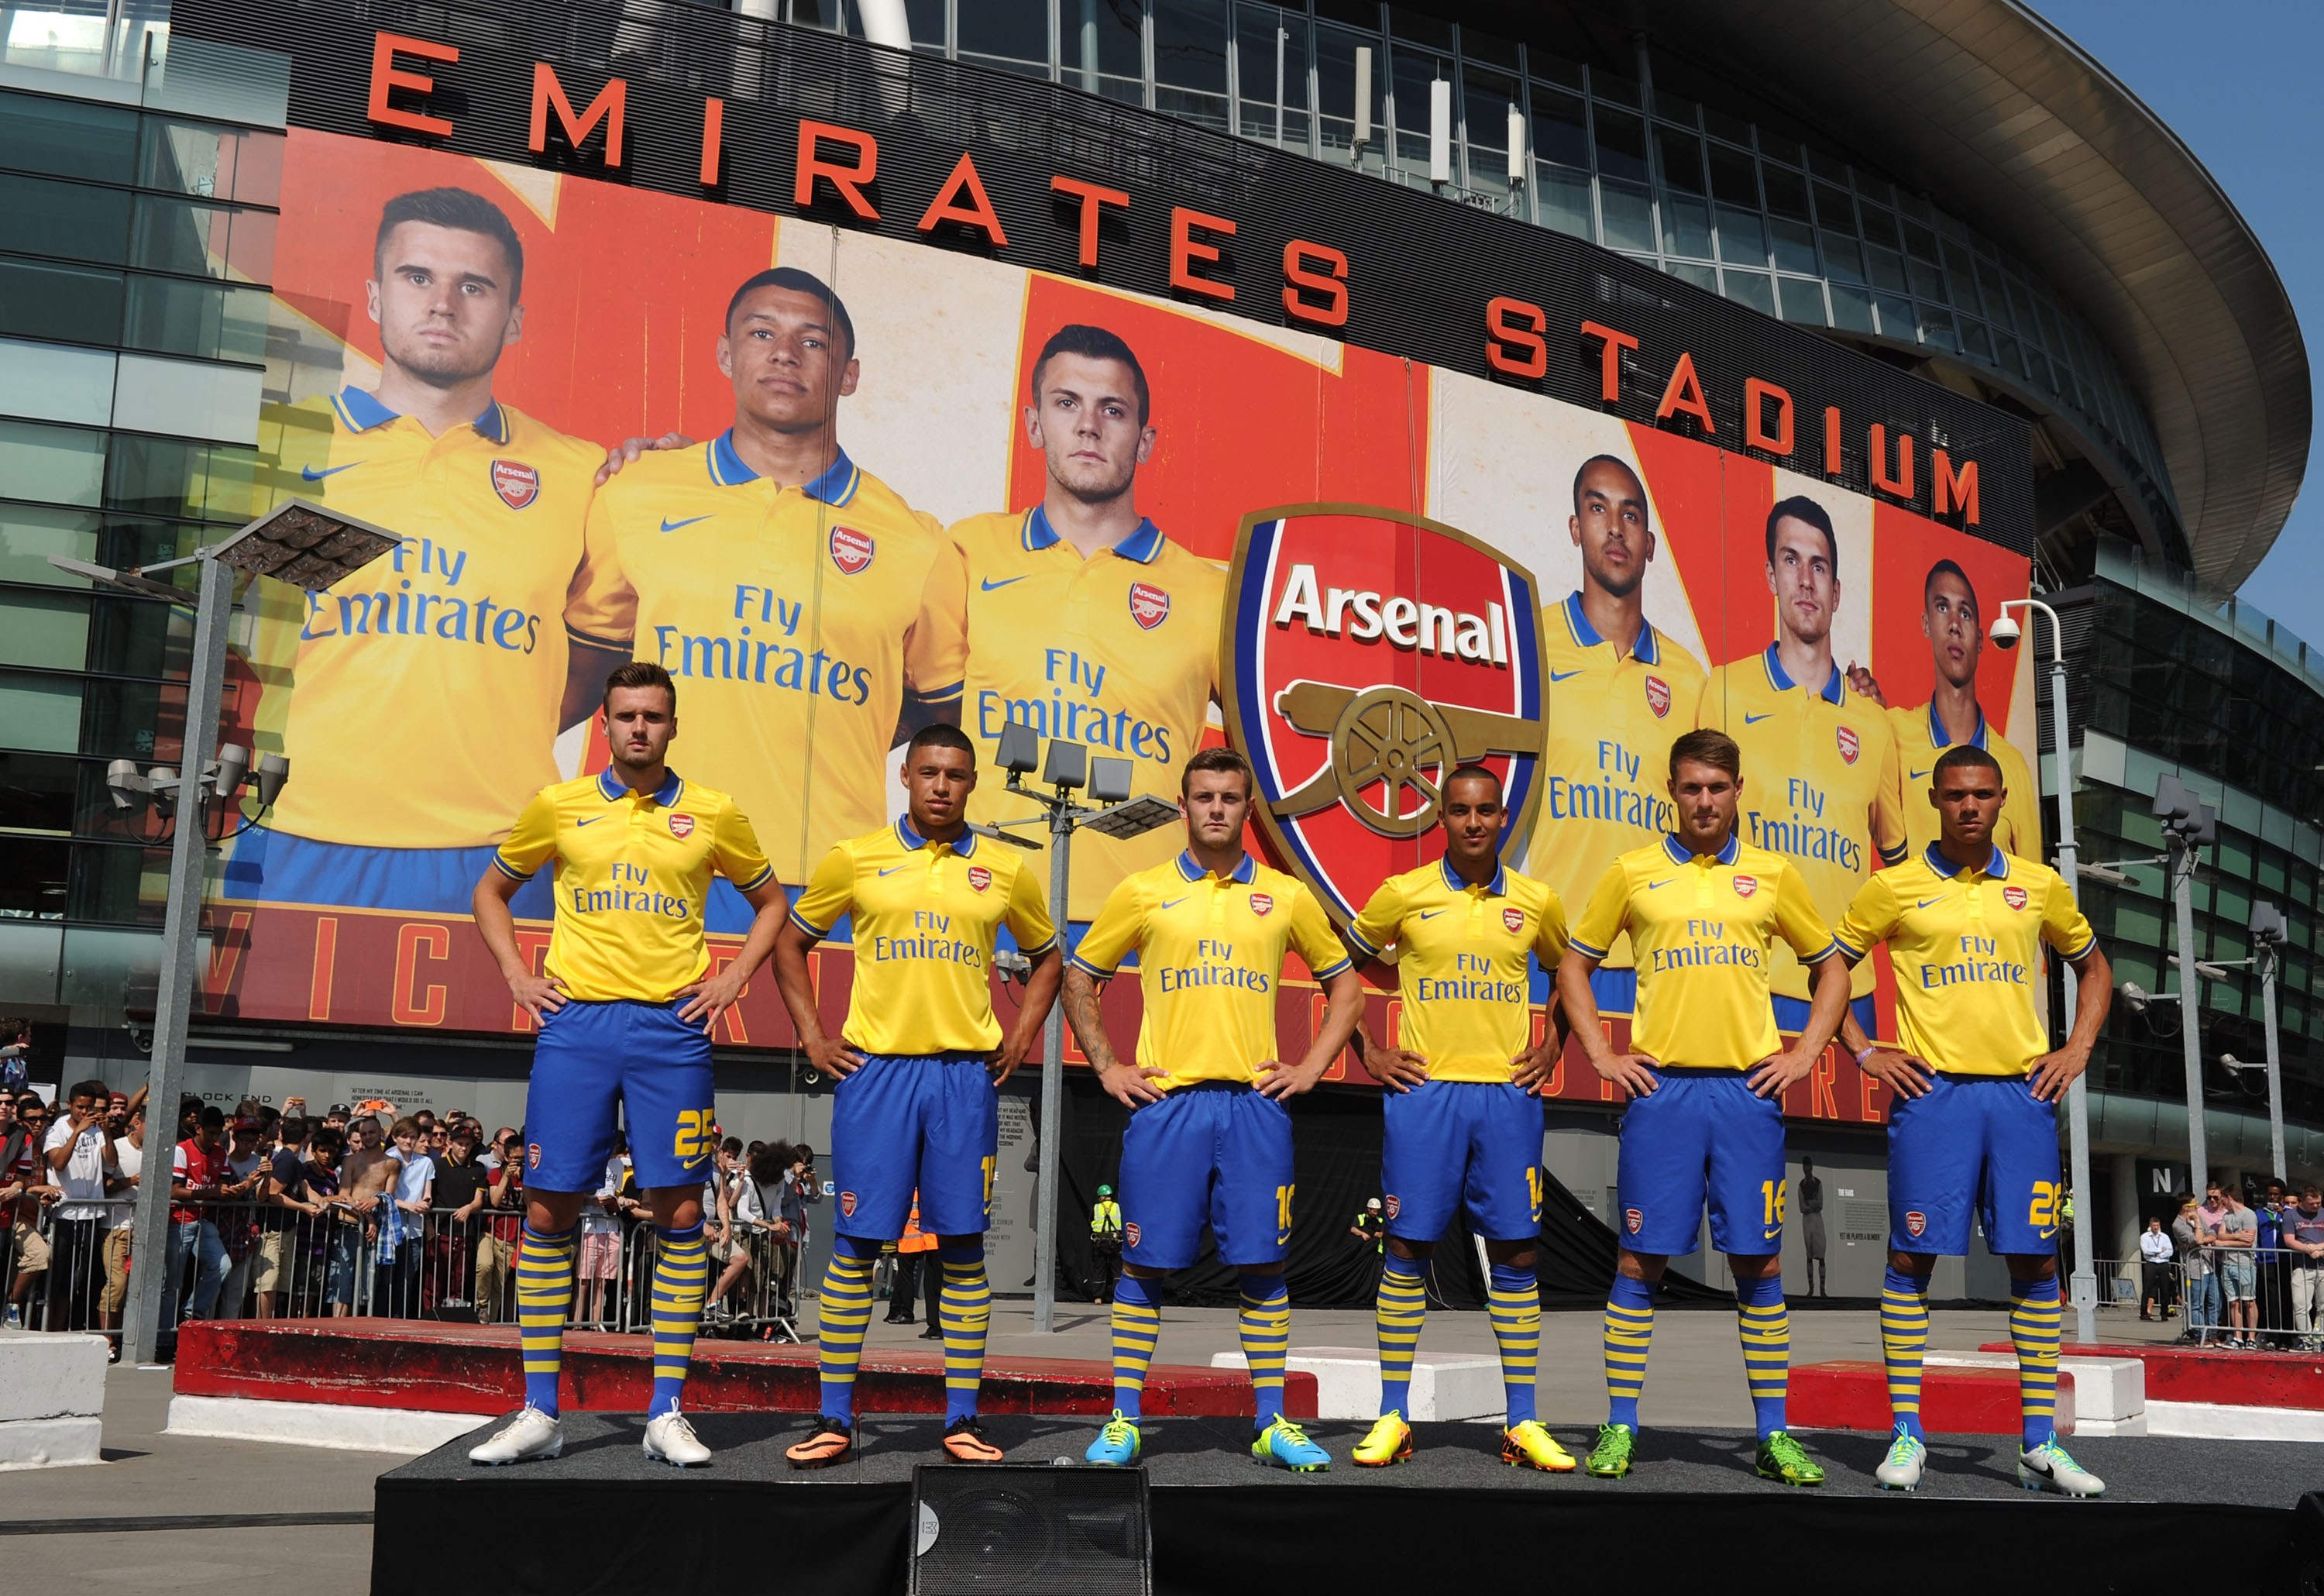 LONDON, ENGLAND - JULY 09: (L-R) Carl Jenkinson, Alex Oxlade-Chamberlain, Jack Wilshere, Theo Walcott, Aaron Ramsey and Kieran Gibbs of Arsenal poses during the launch of the new kit for the 2013-14 season at Emirates Stadium on July 09, 2013 in London, England. (Photo by Stuart MacFarlane/Arsenal FC via Getty Images)